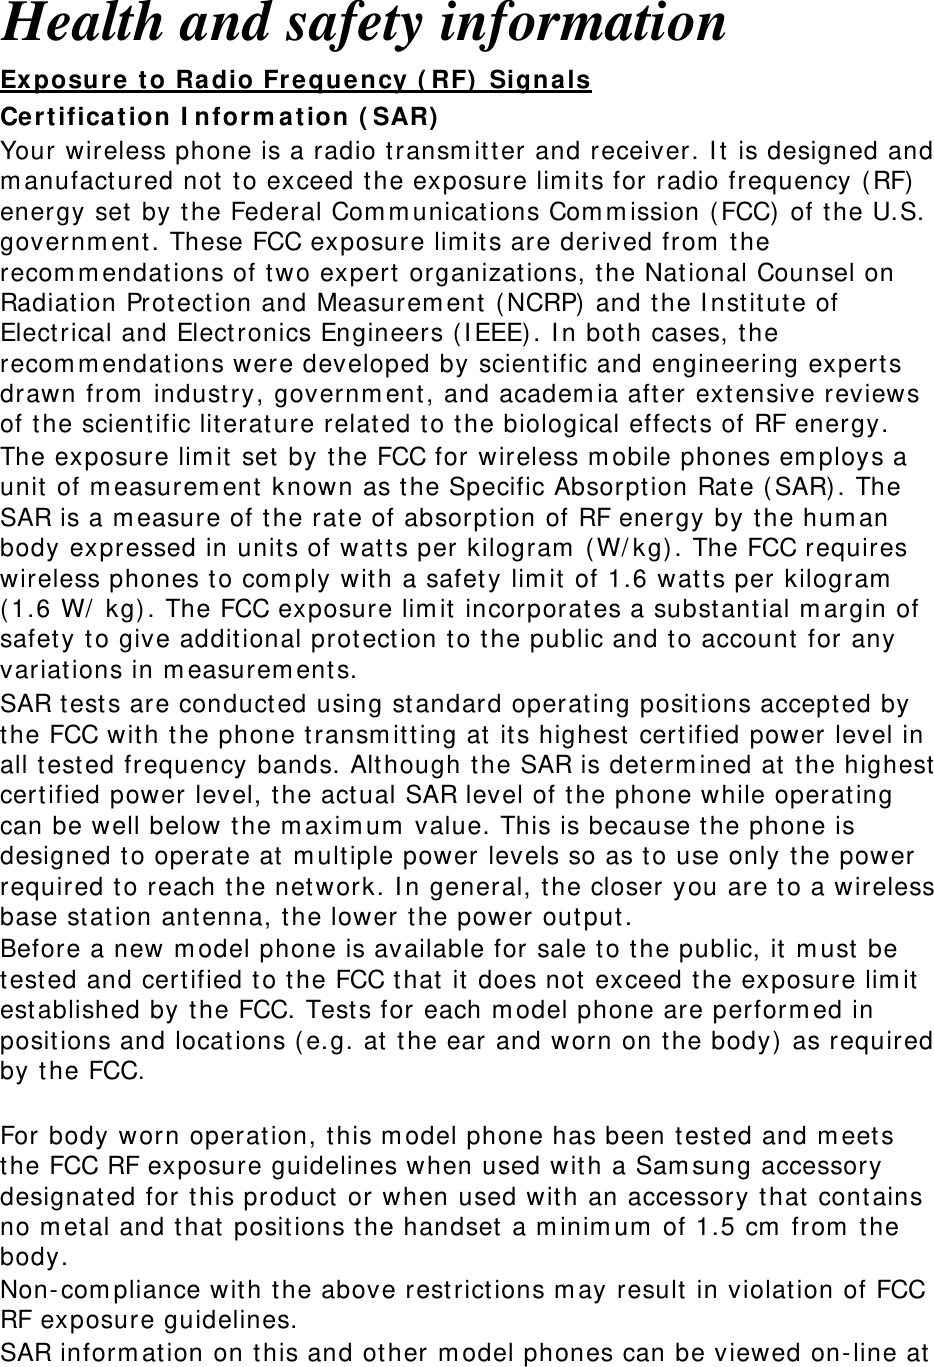  Health and safety information Ex posure t o Ra dio Fr eque ncy ( RF)  Signa ls Cert ifica t ion I nform at ion ( SAR)  Your wireless phone is a radio t ransm it t er and receiver. I t is designed and m anufact ured not  t o exceed the exposure lim it s for radio frequency ( RF) energy set by t he Federal Com m unications Com m ission ( FCC)  of t he U.S. governm ent . These FCC exposure lim its are derived from  the recom m endations of t wo expert organizations, t he Nat ional Counsel on Radiation Prot ect ion and Measurem ent  (NCRP)  and the I nst it ute of Elect rical and Elect ronics Engineers ( I EEE) . I n both cases, t he recom m endations were developed by scientific and engineering experts drawn from  indust ry, governm ent , and academ ia aft er extensive reviews of t he scient ific lit erat ure relat ed t o t he biological effect s of RF energy. The exposure lim it  set by t he FCC for wireless m obile phones em ploys a unit of m easurem ent  known as t he Specific Absorpt ion Rat e ( SAR). The SAR is a m easure of the rat e of absorpt ion of RF energy by t he hum an body expressed in unit s of wat t s per kilogram  (W/ kg) . The FCC requires wireless phones t o com ply wit h a safet y lim it of 1.6 wat ts per kilogram  ( 1.6 W/  kg) . The FCC exposure lim it incorporat es a subst ant ial m argin of safet y t o give addit ional protection t o t he public and t o account  for any variations in m easurem ent s. SAR t est s are conduct ed using st andard operat ing posit ions accept ed by the FCC wit h t he phone t ransm it t ing at  it s highest  certified power level in all t est ed frequency bands. Alt hough t he SAR is det erm ined at  the highest  certified power level, t he act ual SAR level of t he phone while operat ing can be well below t he m axim um  value. This is because t he phone is designed t o operat e at  m ult iple power levels so as t o use only t he power required t o reach the net work. I n general, t he closer you are to a wireless base st ation antenna, t he lower t he power out put. Before a new m odel phone is available for sale t o t he public, it  m ust  be tested and certified t o t he FCC t hat  it  does not  exceed the exposure lim it  est ablished by t he FCC. Tests for each m odel phone are perform ed in posit ions and locat ions ( e.g. at  the ear and worn on t he body) as required by t he FCC.      For body worn operat ion, t his m odel phone has been t est ed and m eet s the FCC RF exposure guidelines when used wit h a Sam sung accessory designat ed for t his product  or when used with an accessory that  contains no m et al and t hat  posit ions the handset  a m inim um  of 1.5 cm  from  t he body.  Non- com pliance with t he above restrict ions m ay result in violat ion of FCC RF exposure guidelines. SAR inform at ion on t his and ot her m odel phones can be viewed on-line at  